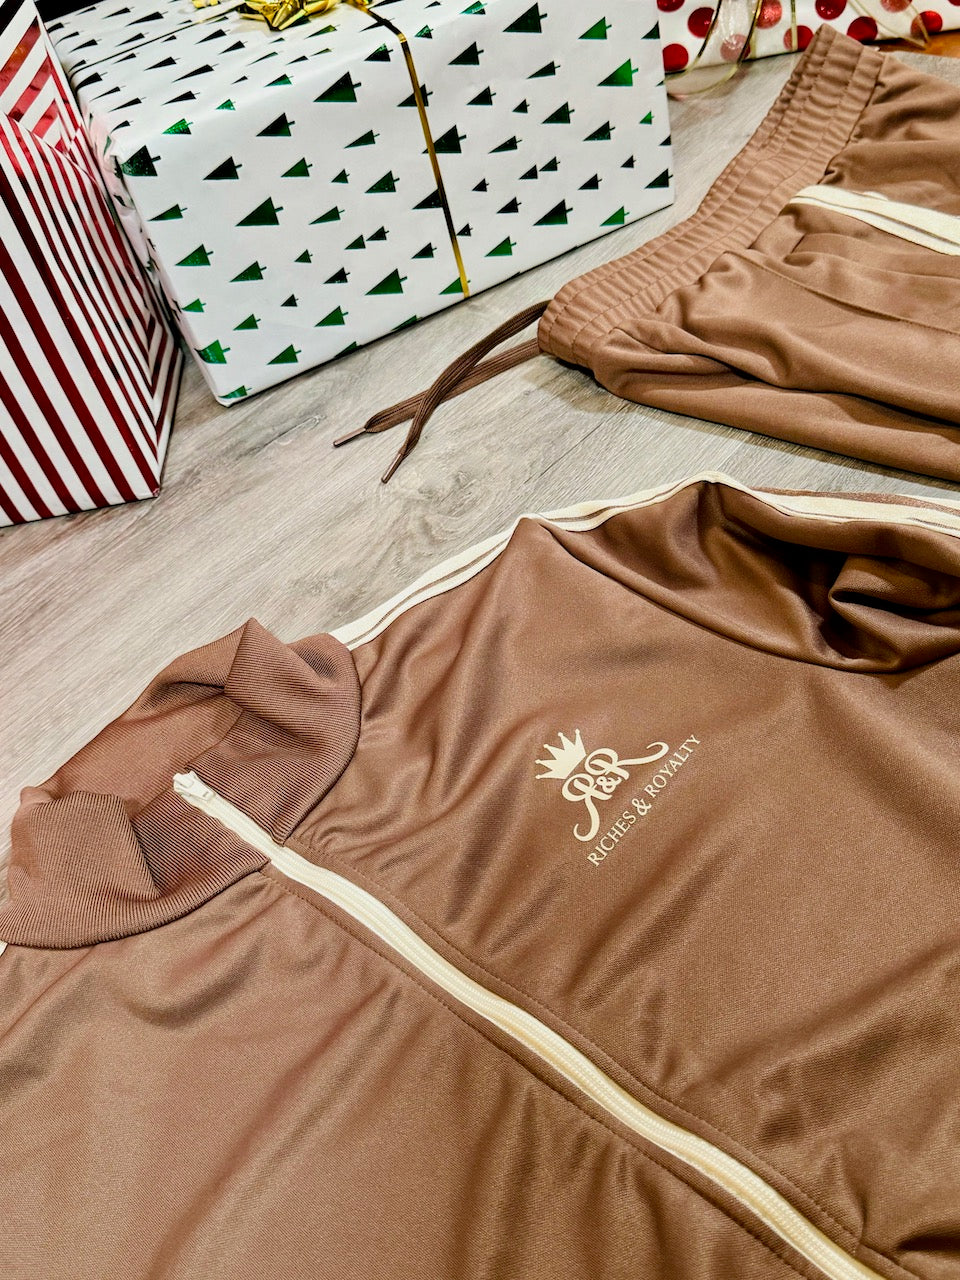 R&R Emblem Sweatsuit Set - Brown and Off White